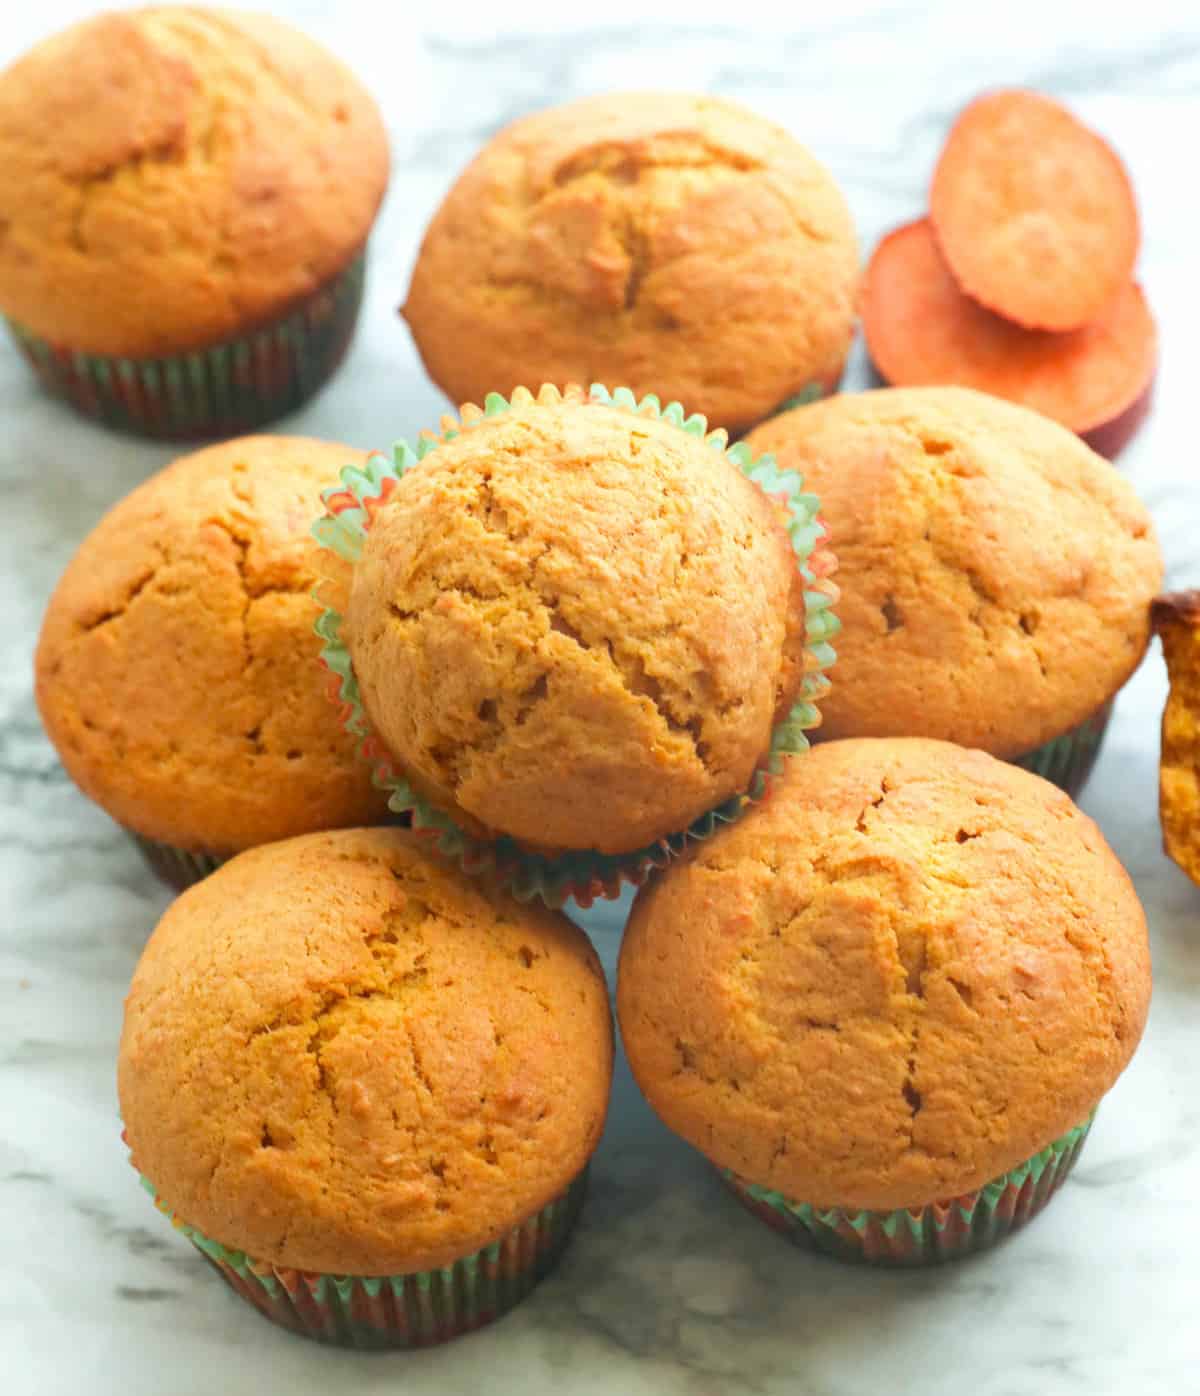 Sweet potato muffins sans streusel fresh from the oven